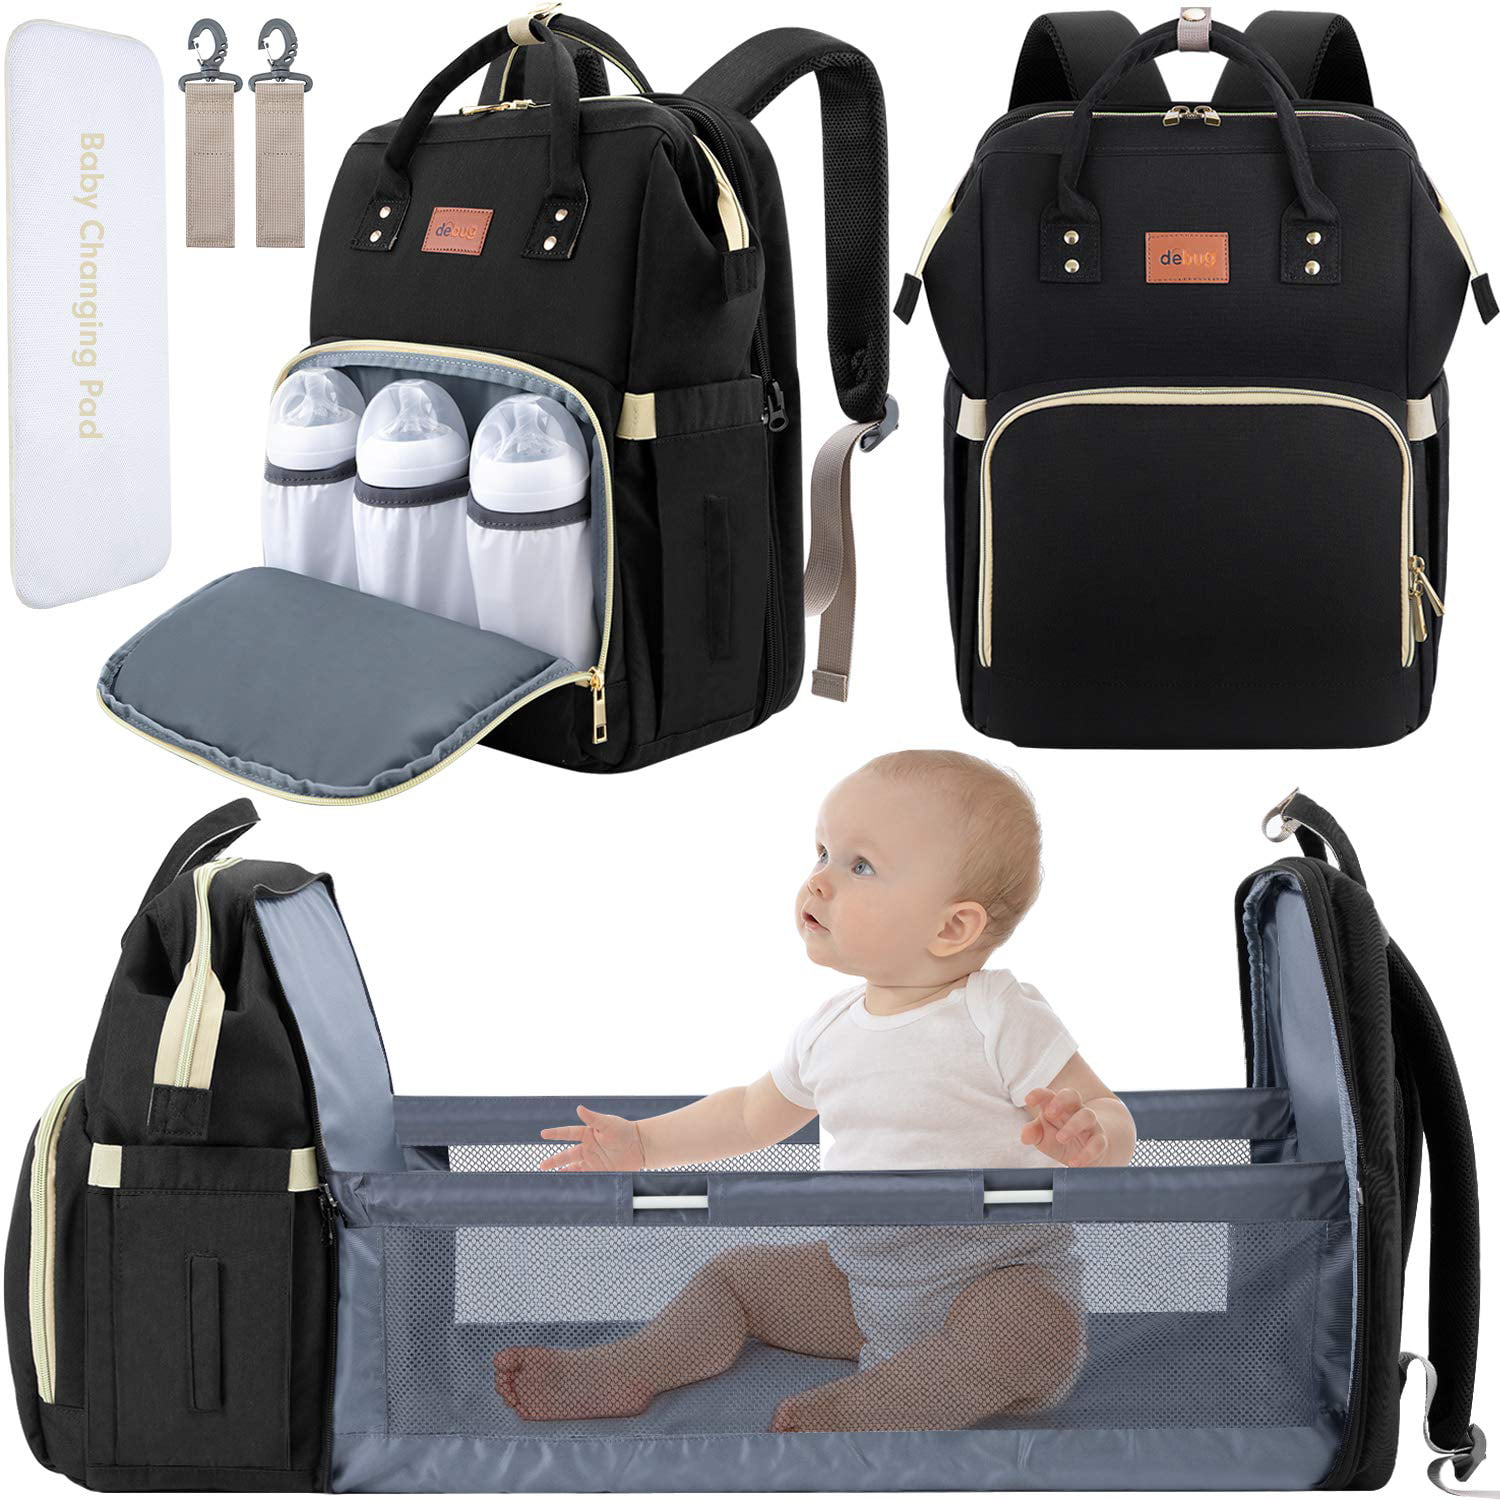 Large Baby Diaper Bookbag with Changing Pad Great Quality Organizer Waterproof Laptop Diaper Backpack for Baby Stuff Dark Blue Diaper Bags for Boys Lots of Pockets for Dad/Mom Stroller Straps 